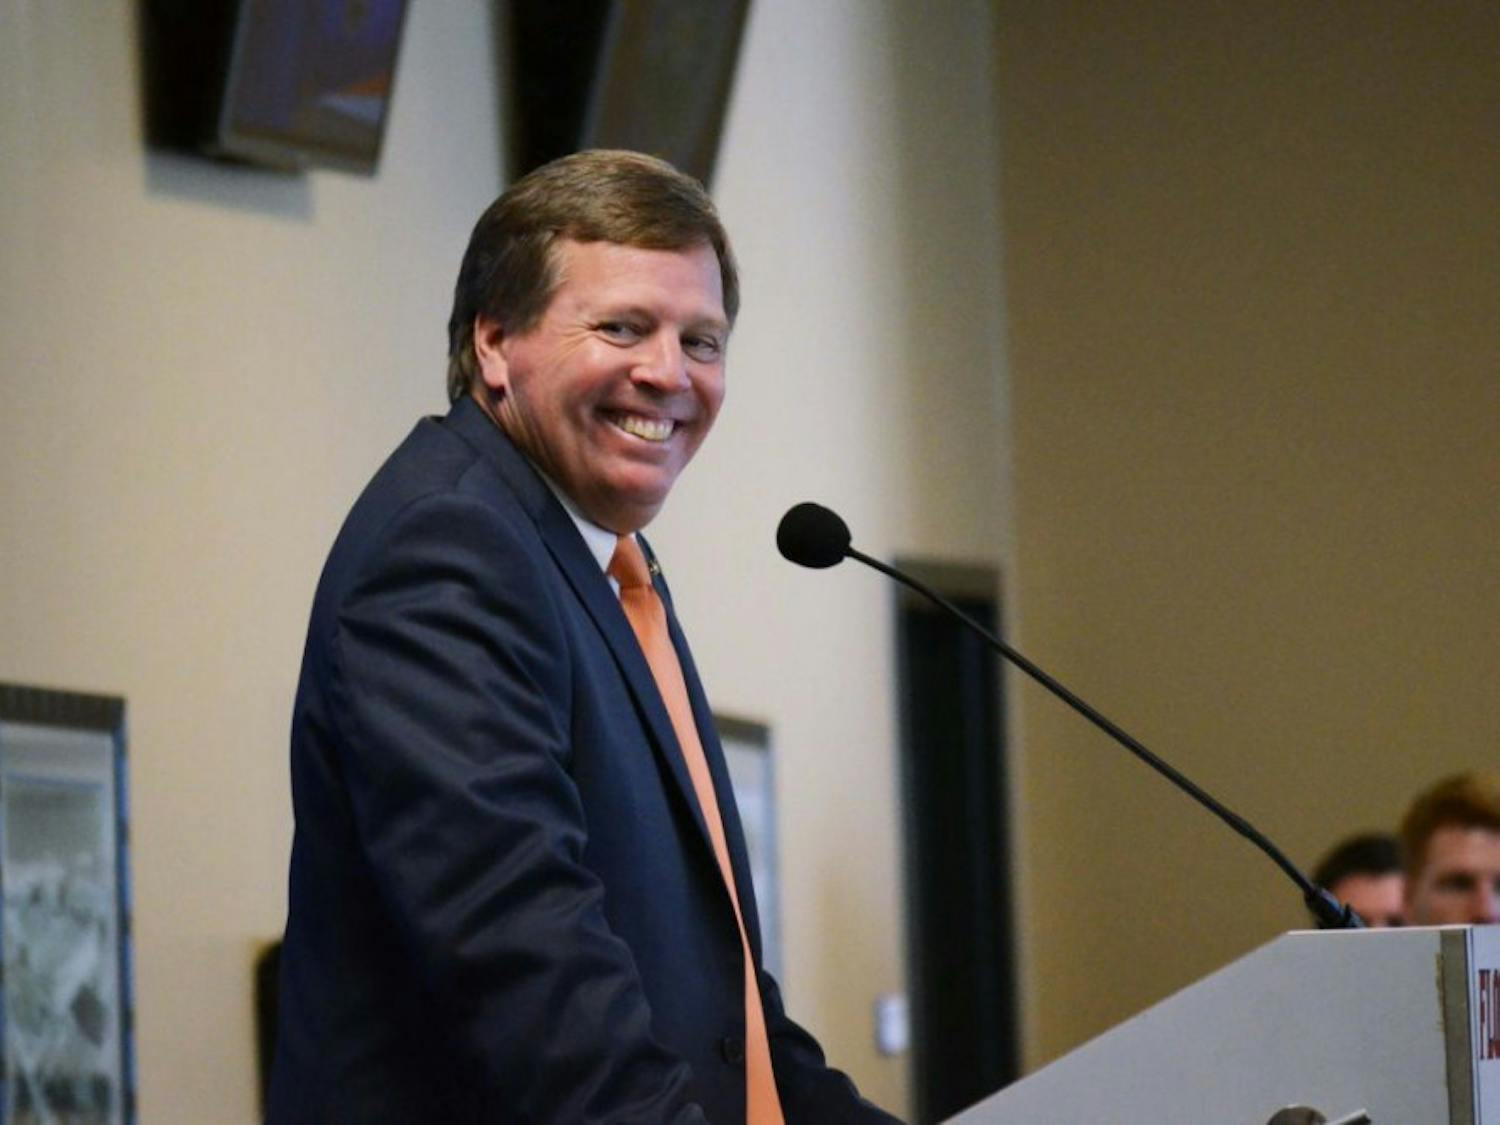 New head football coach Jim McElwain speaks at his introductory press conference in Ben Hill Griffin Stadium.